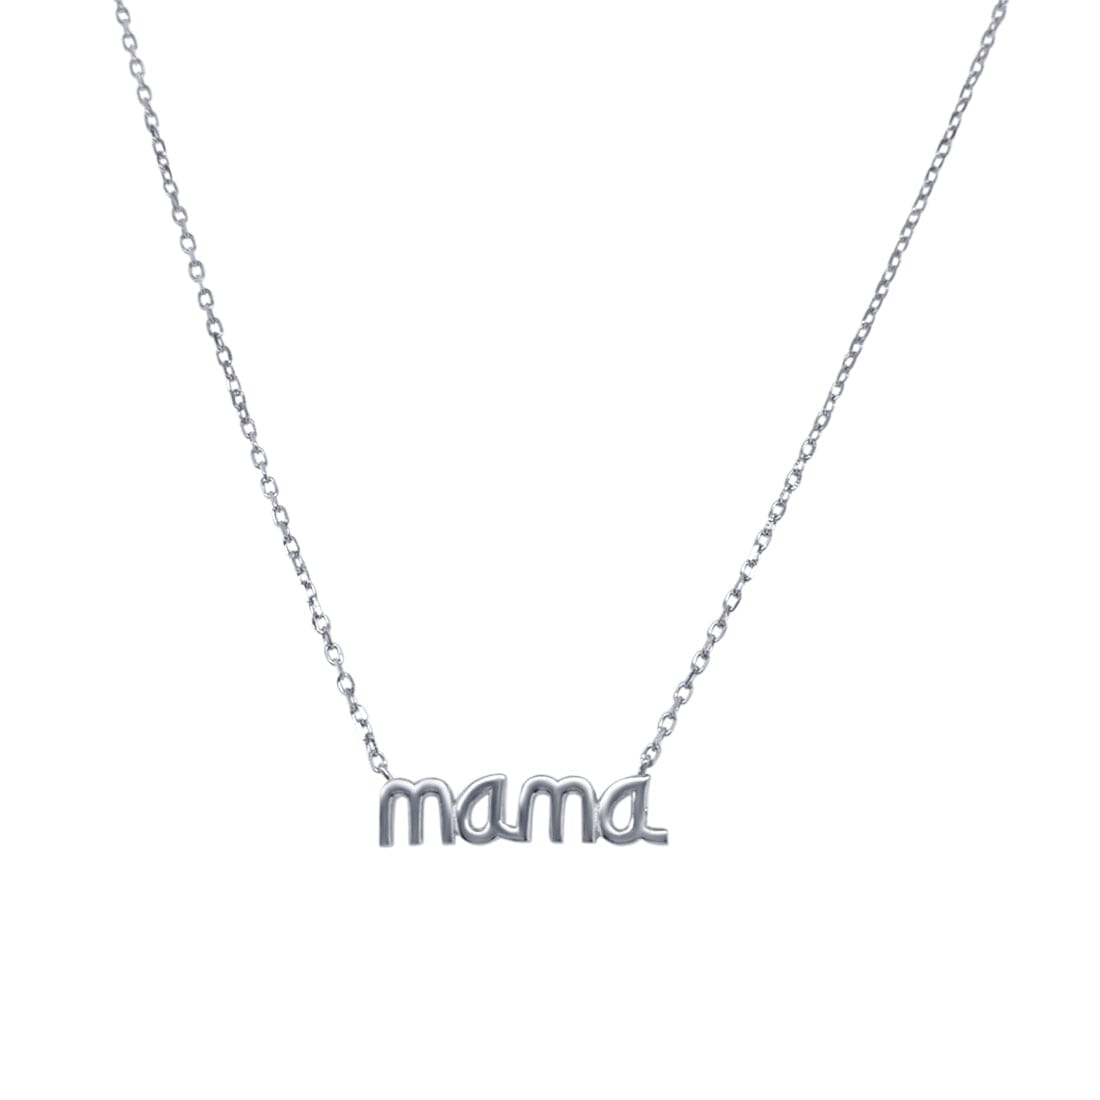 45cm Mama Necklace in Sterling Silver Necklaces Bevilles 